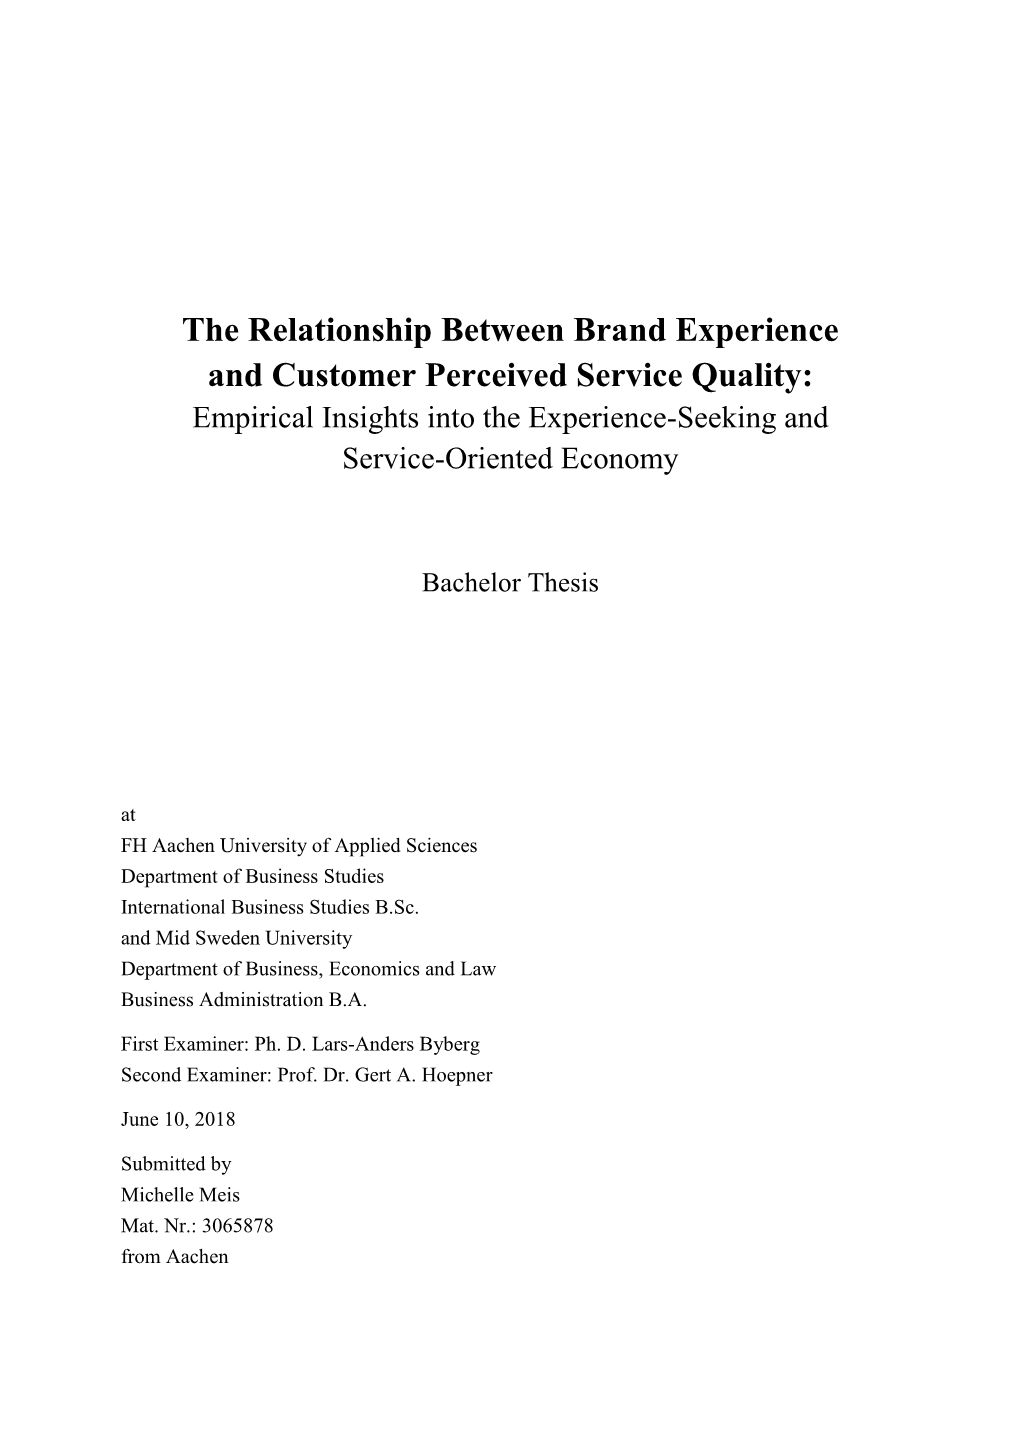 The Relationship Between Brand Experience and Customer Perceived Service Quality: Empirical Insights Into the Experience-Seeking And